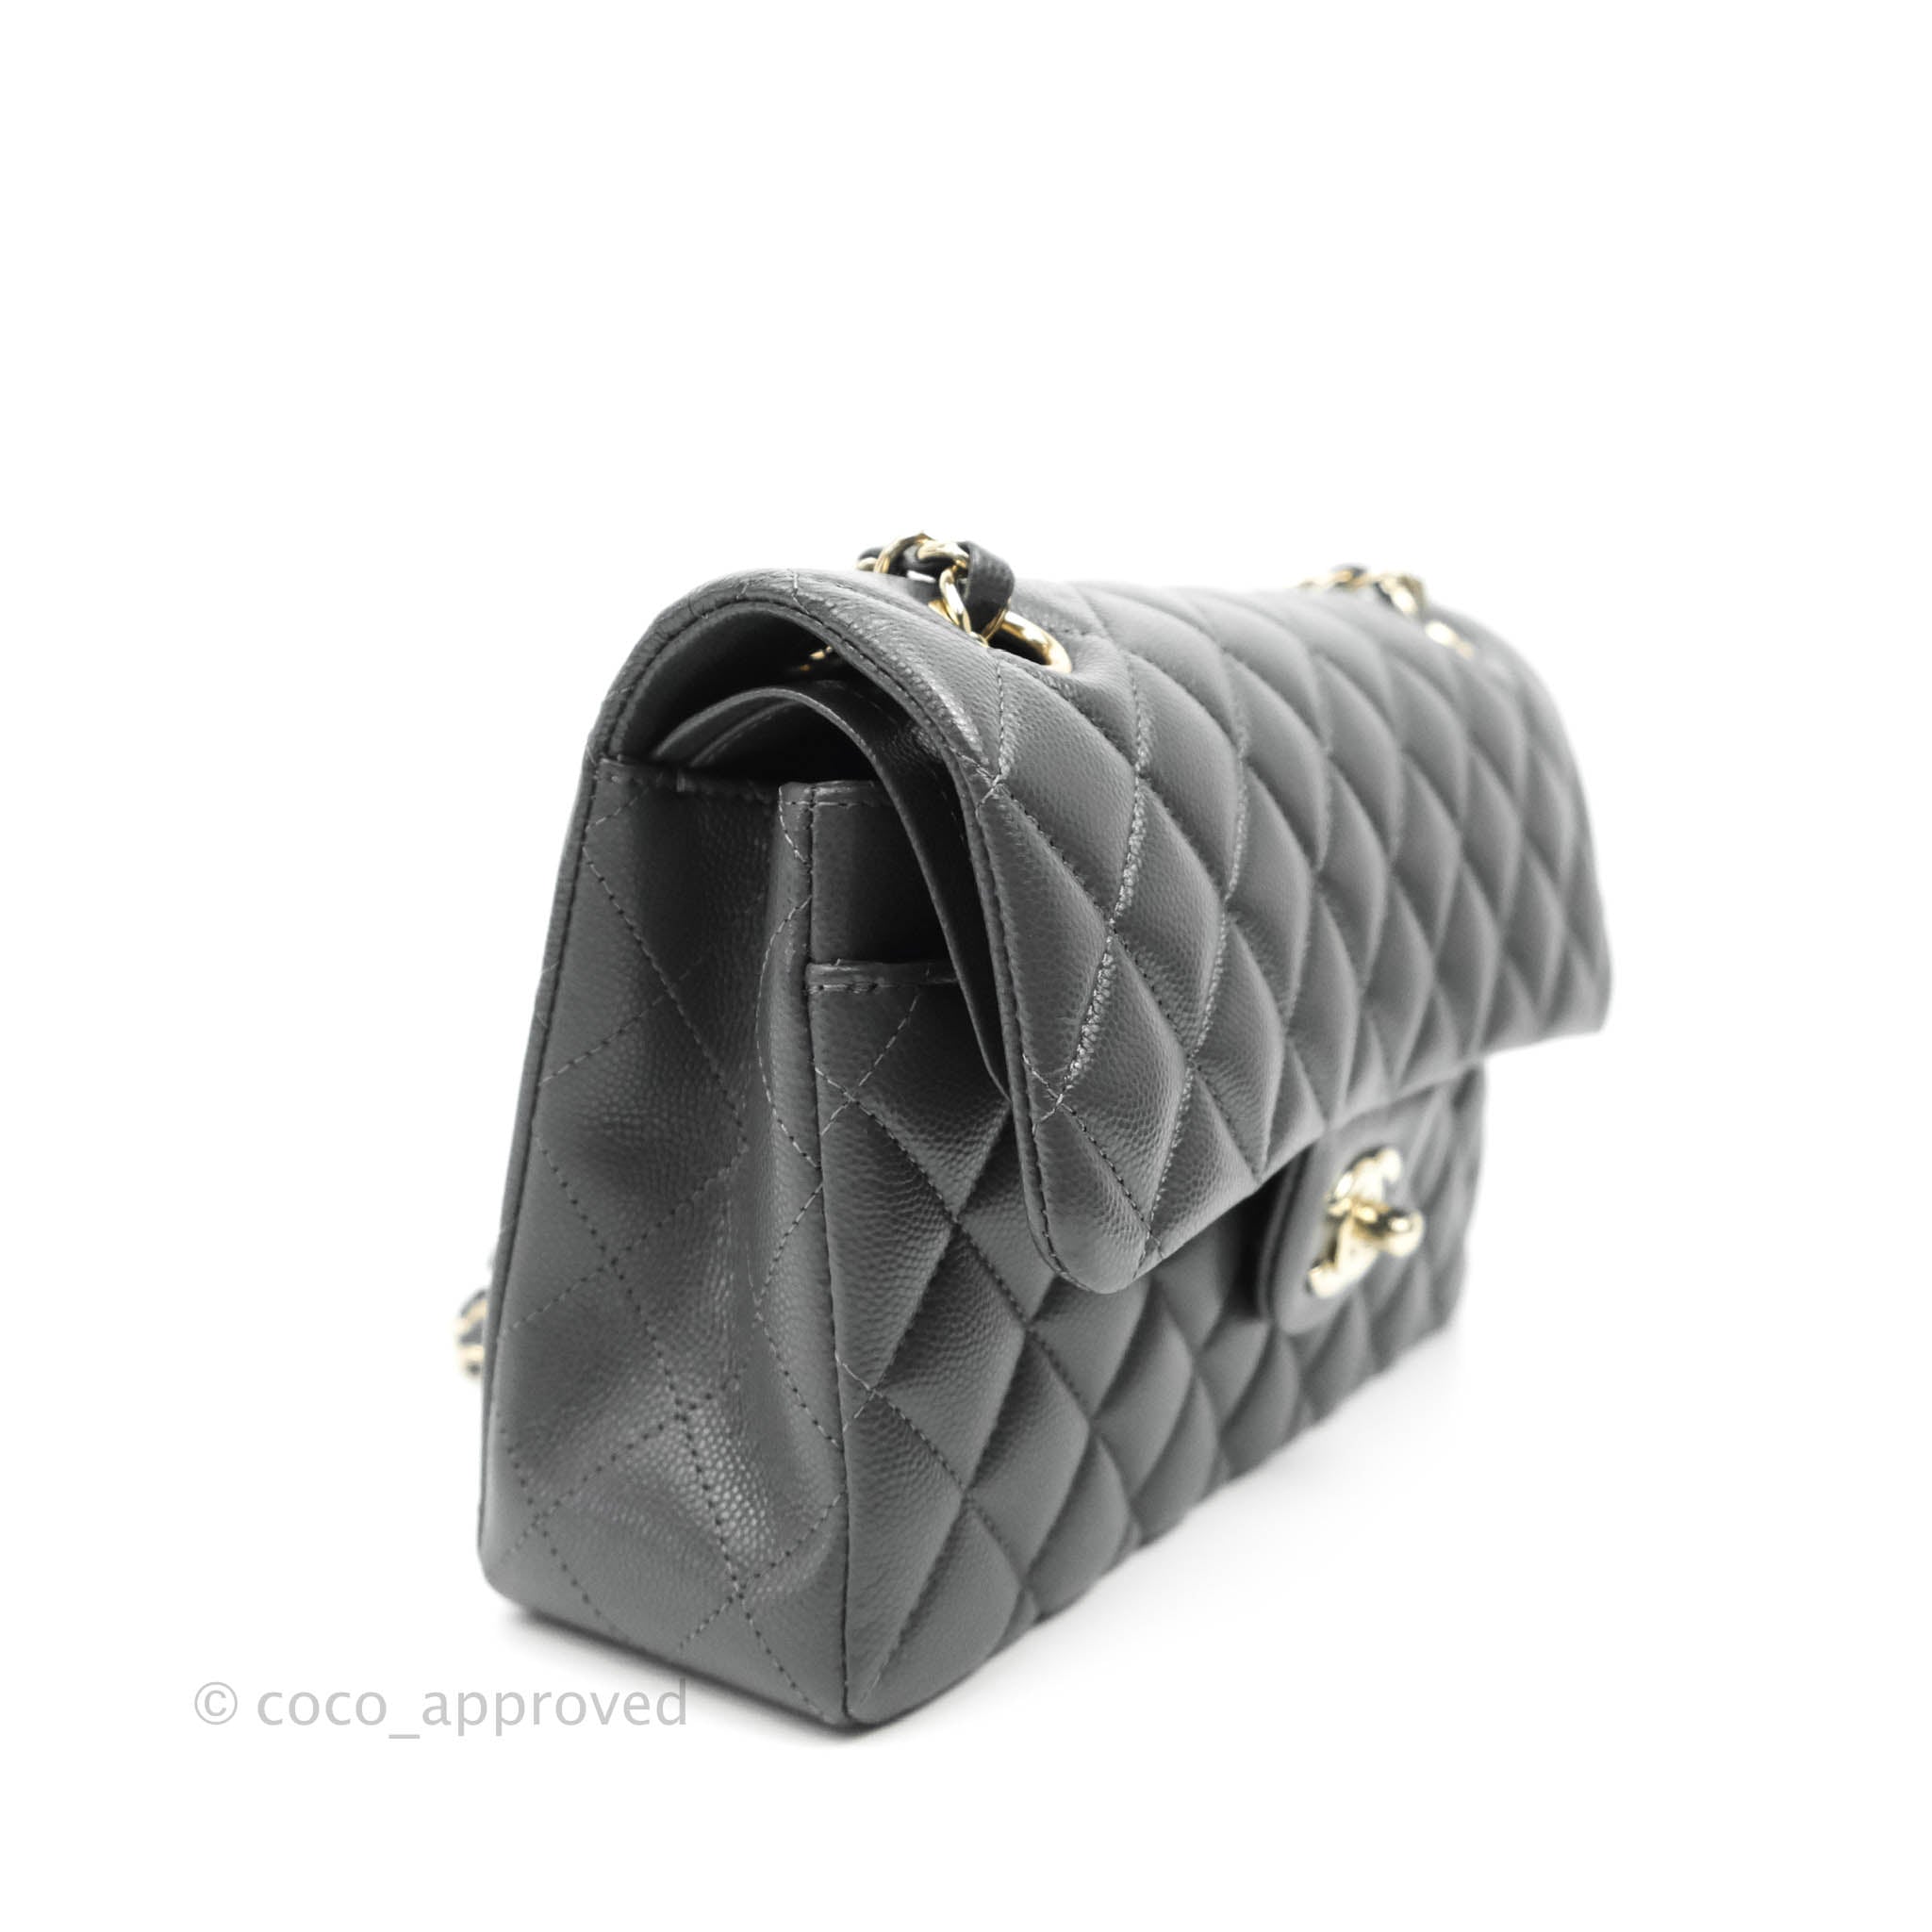 Chanel Small Flap Bag AS3365 B08472 NJ057, Grey, One Size